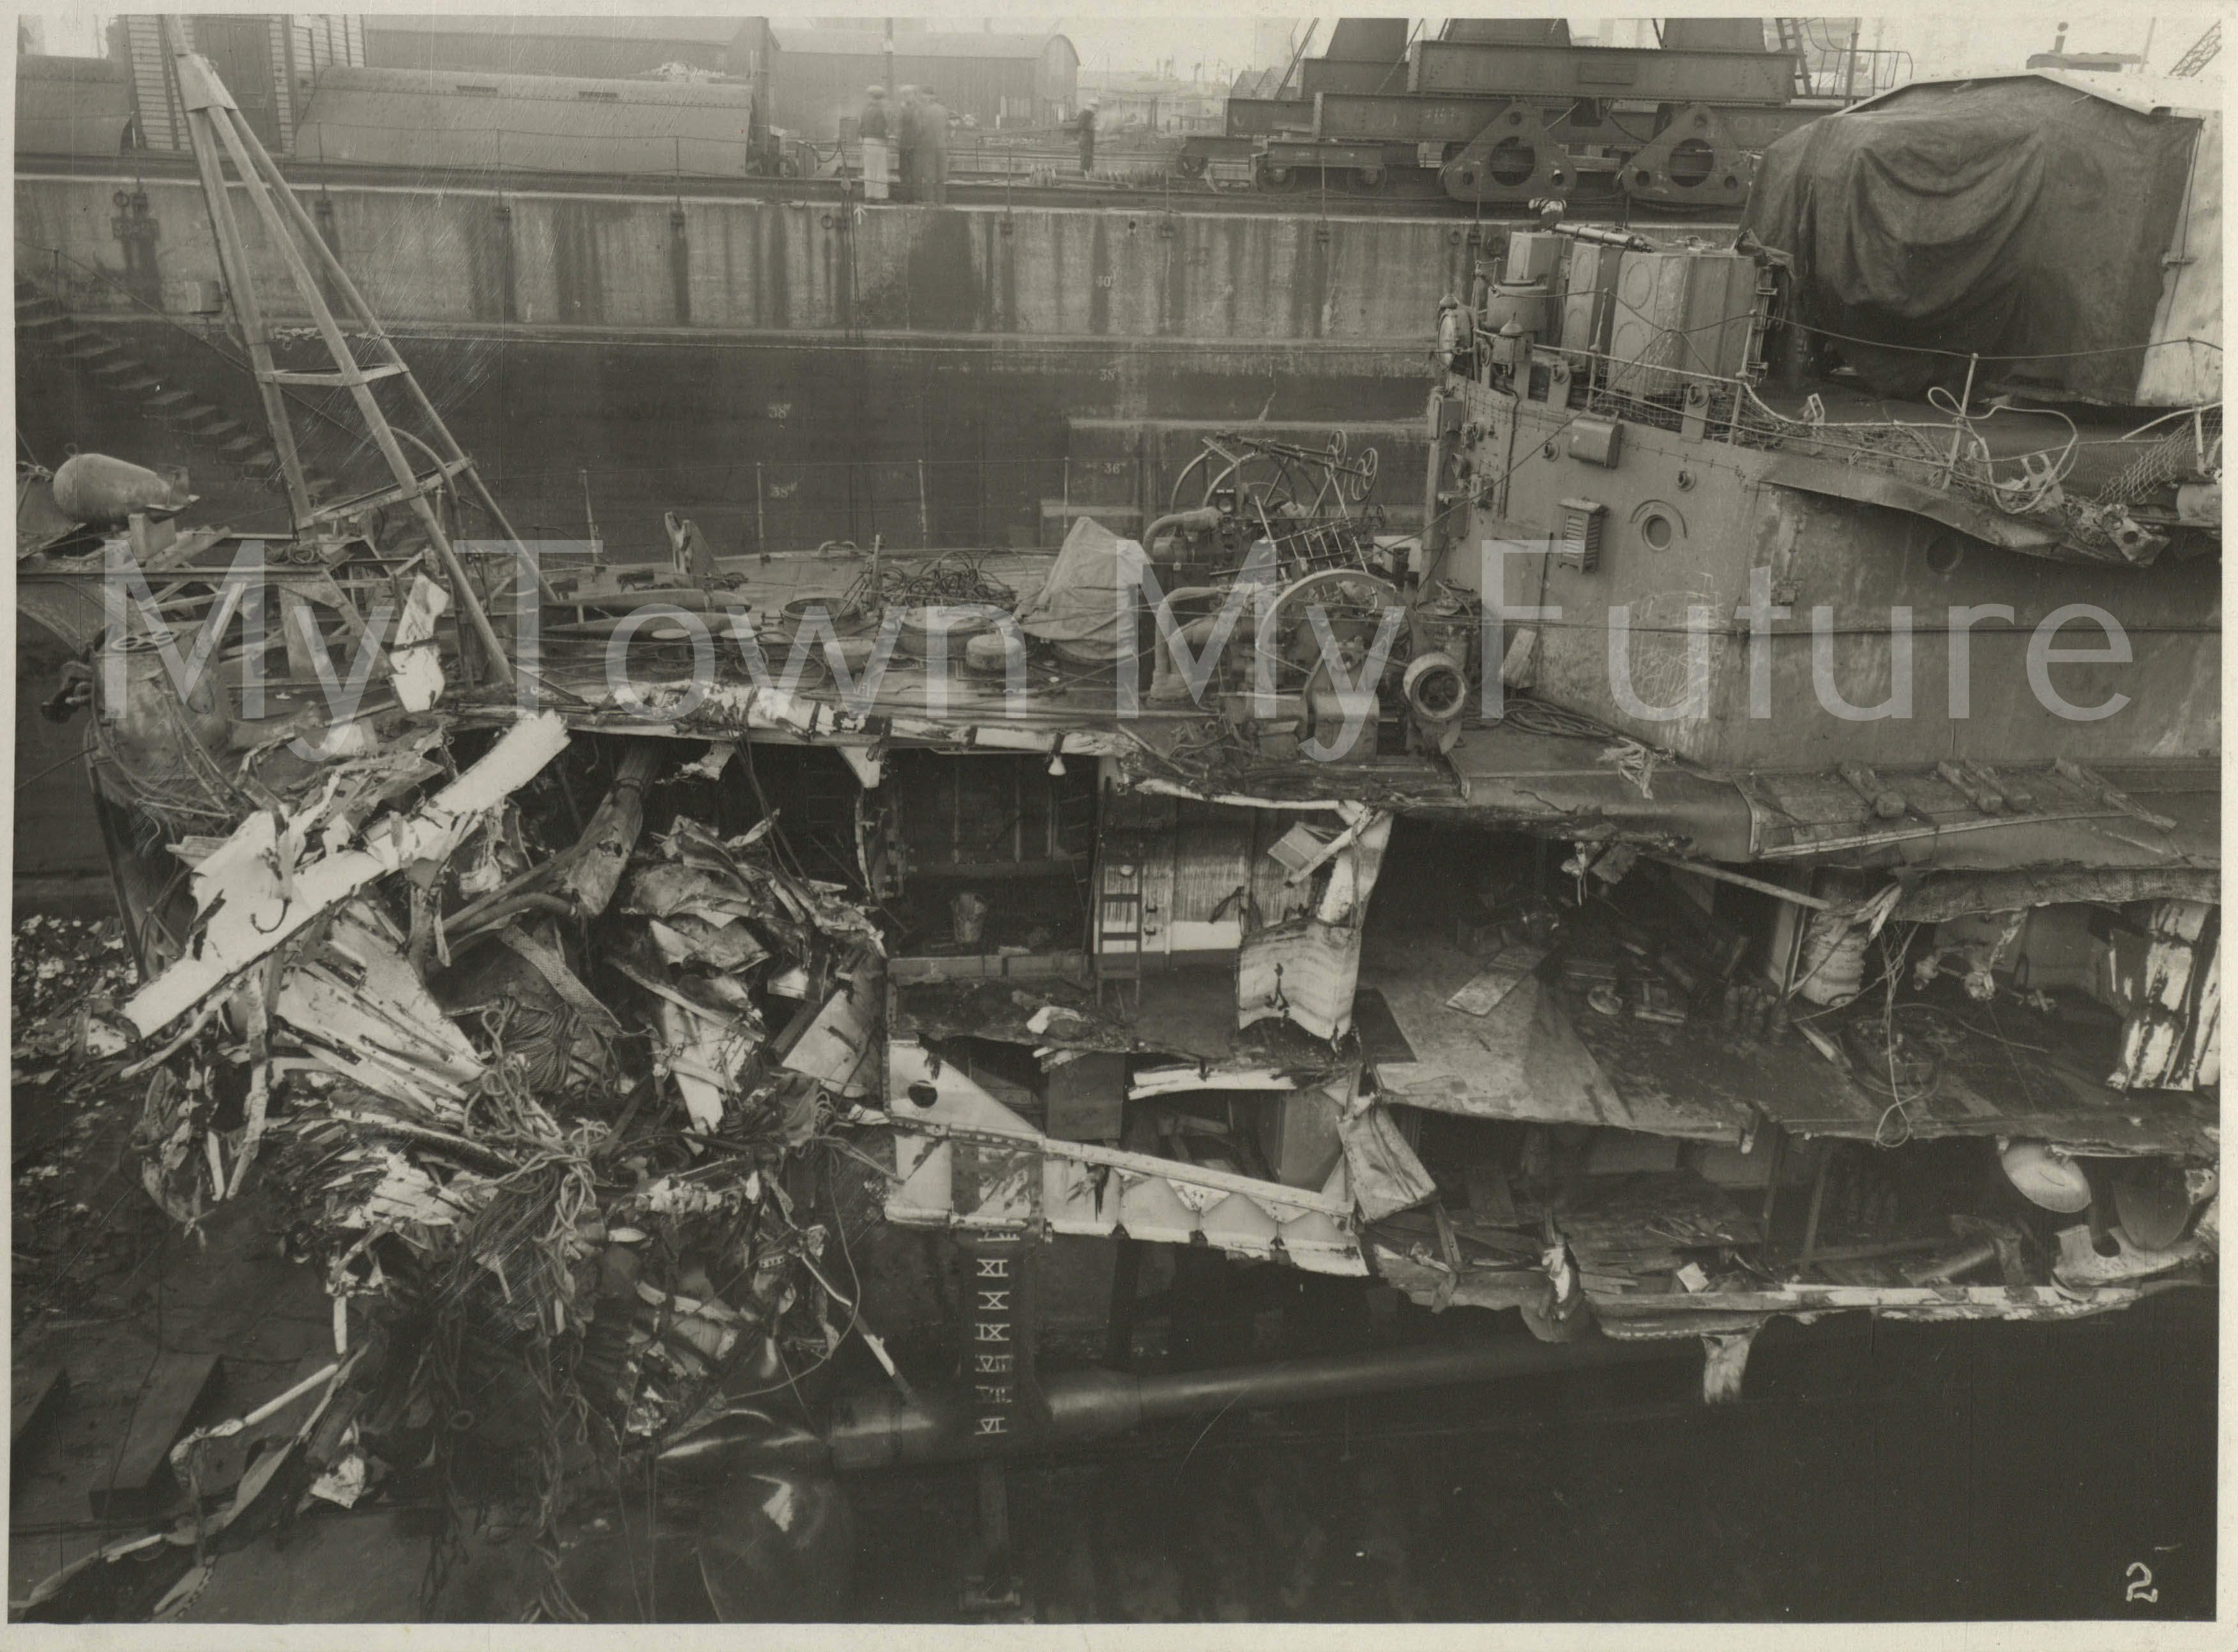 Smith's Dock Ships - HMS Javelin - WWII repair collision damage